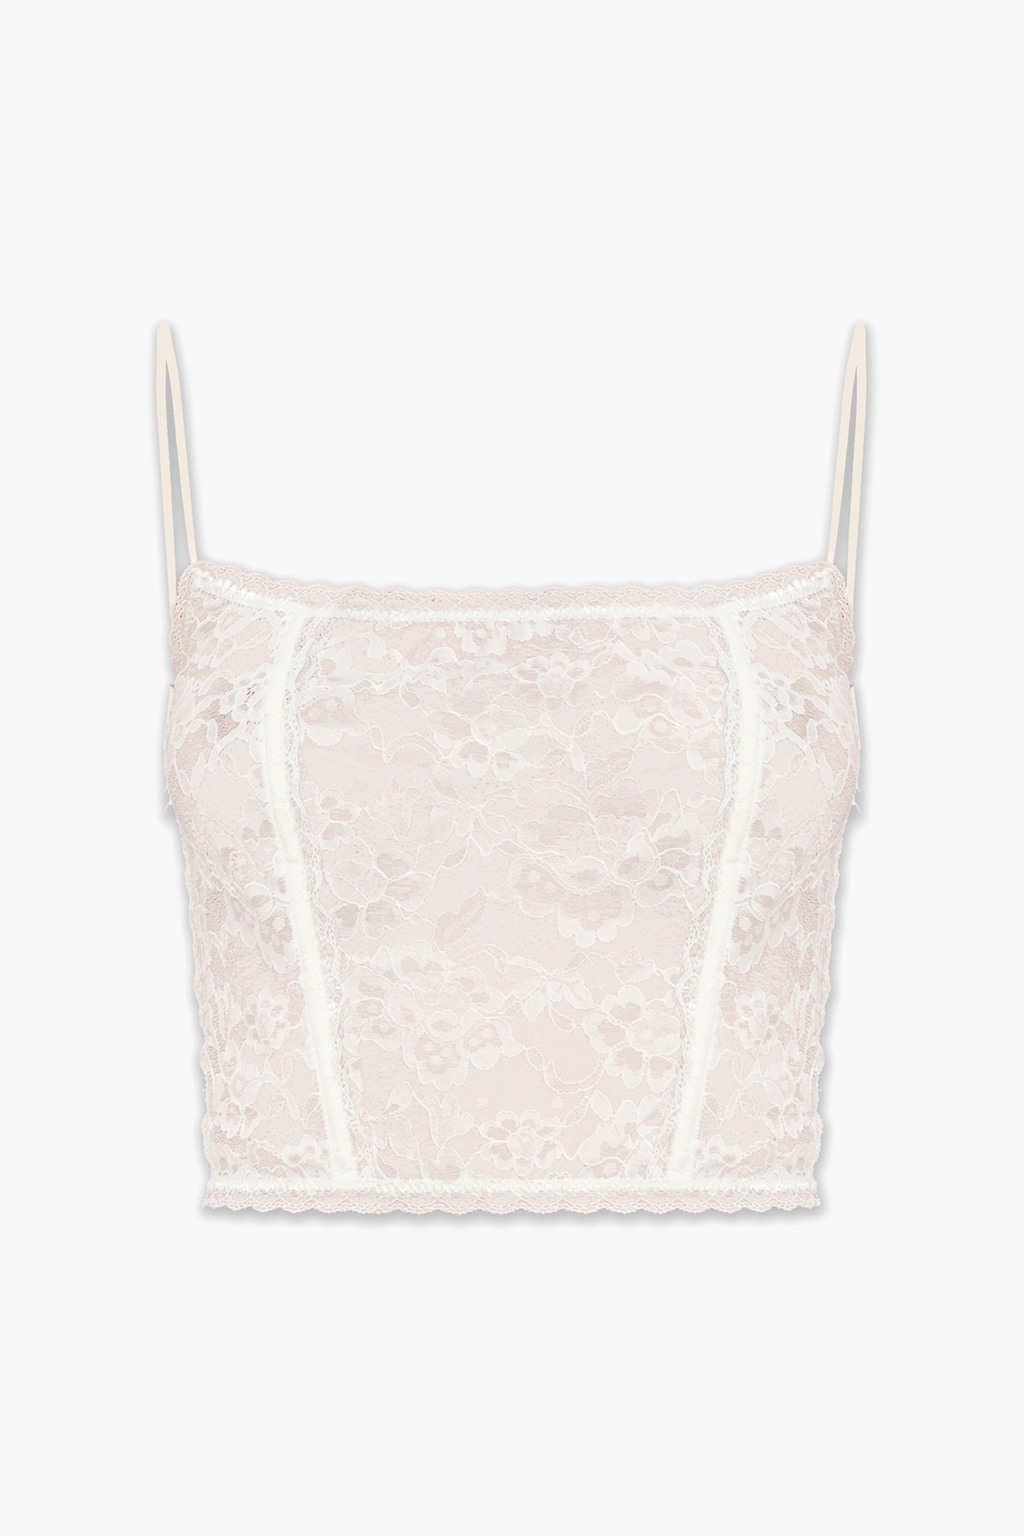 Oseree Lace top with underwires